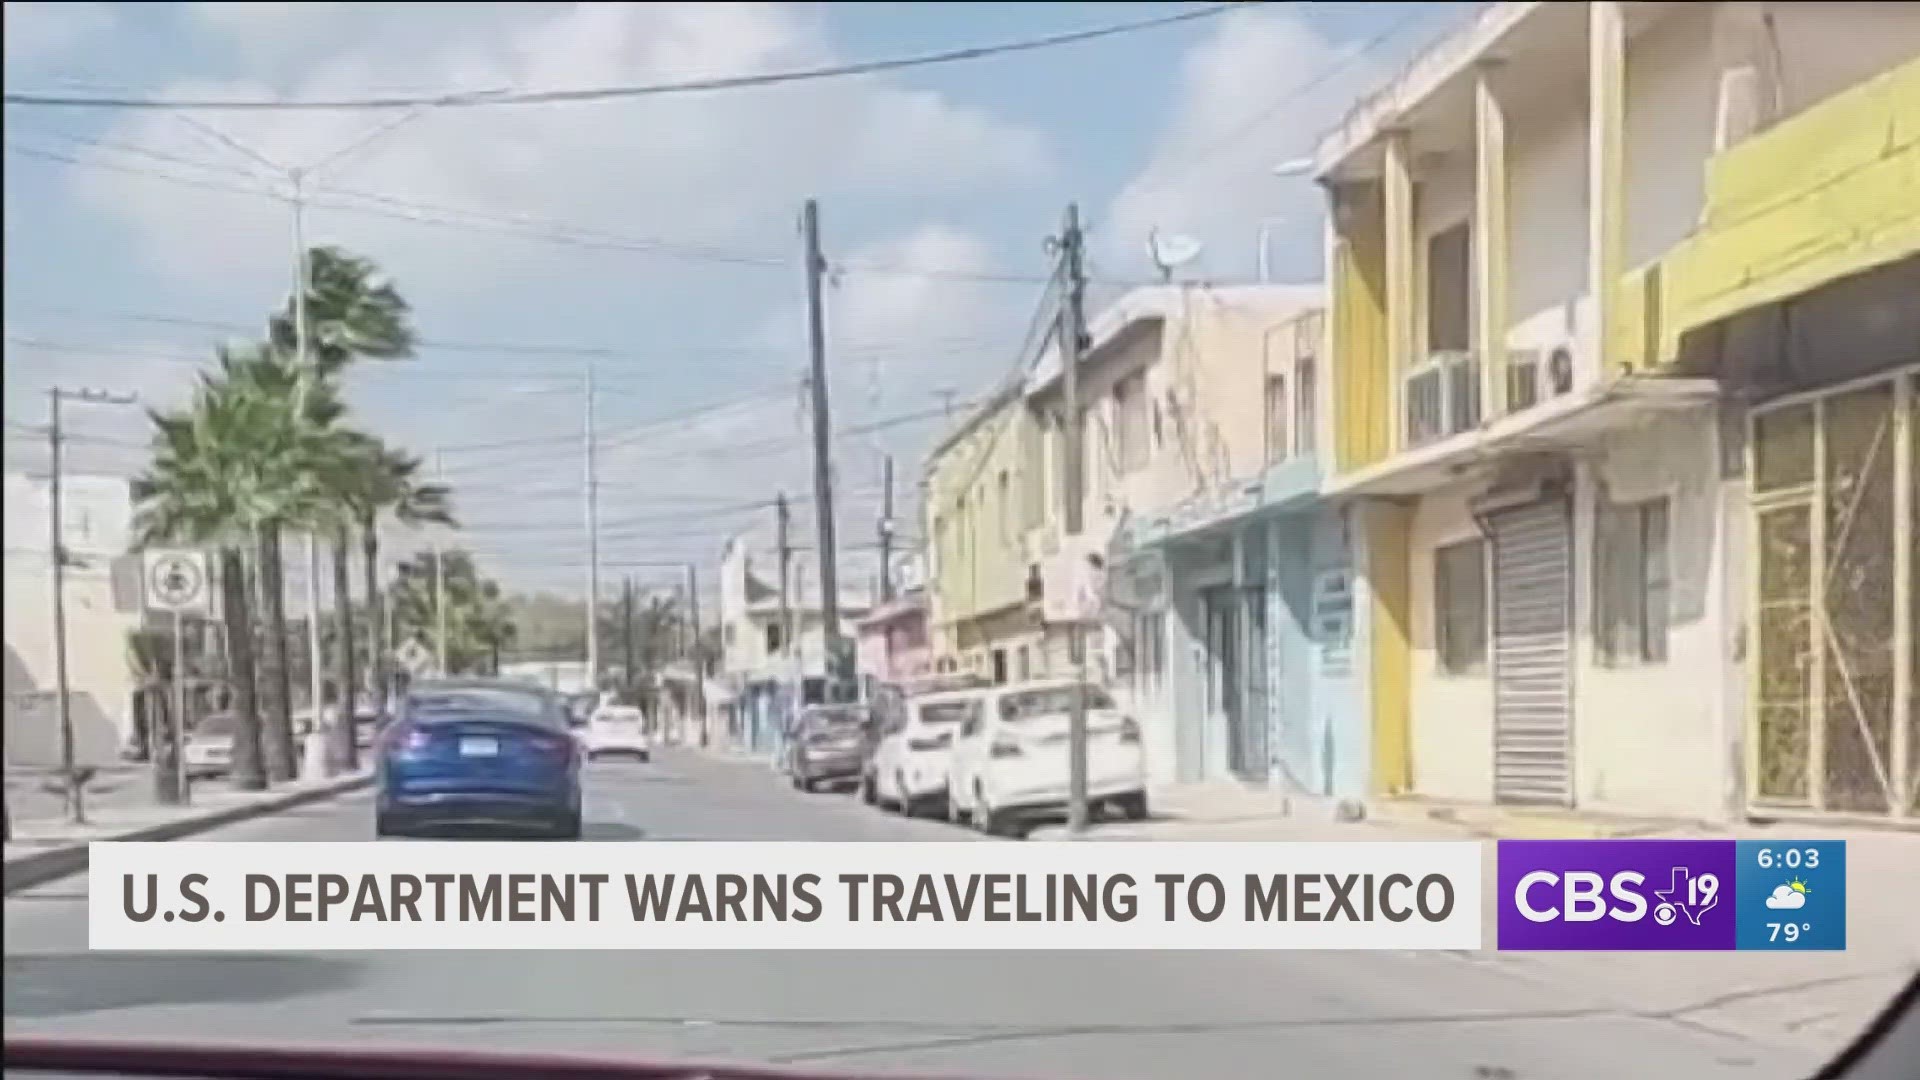 With this warning in place it’s important to be on high alert if you’re traveling to Mexico.